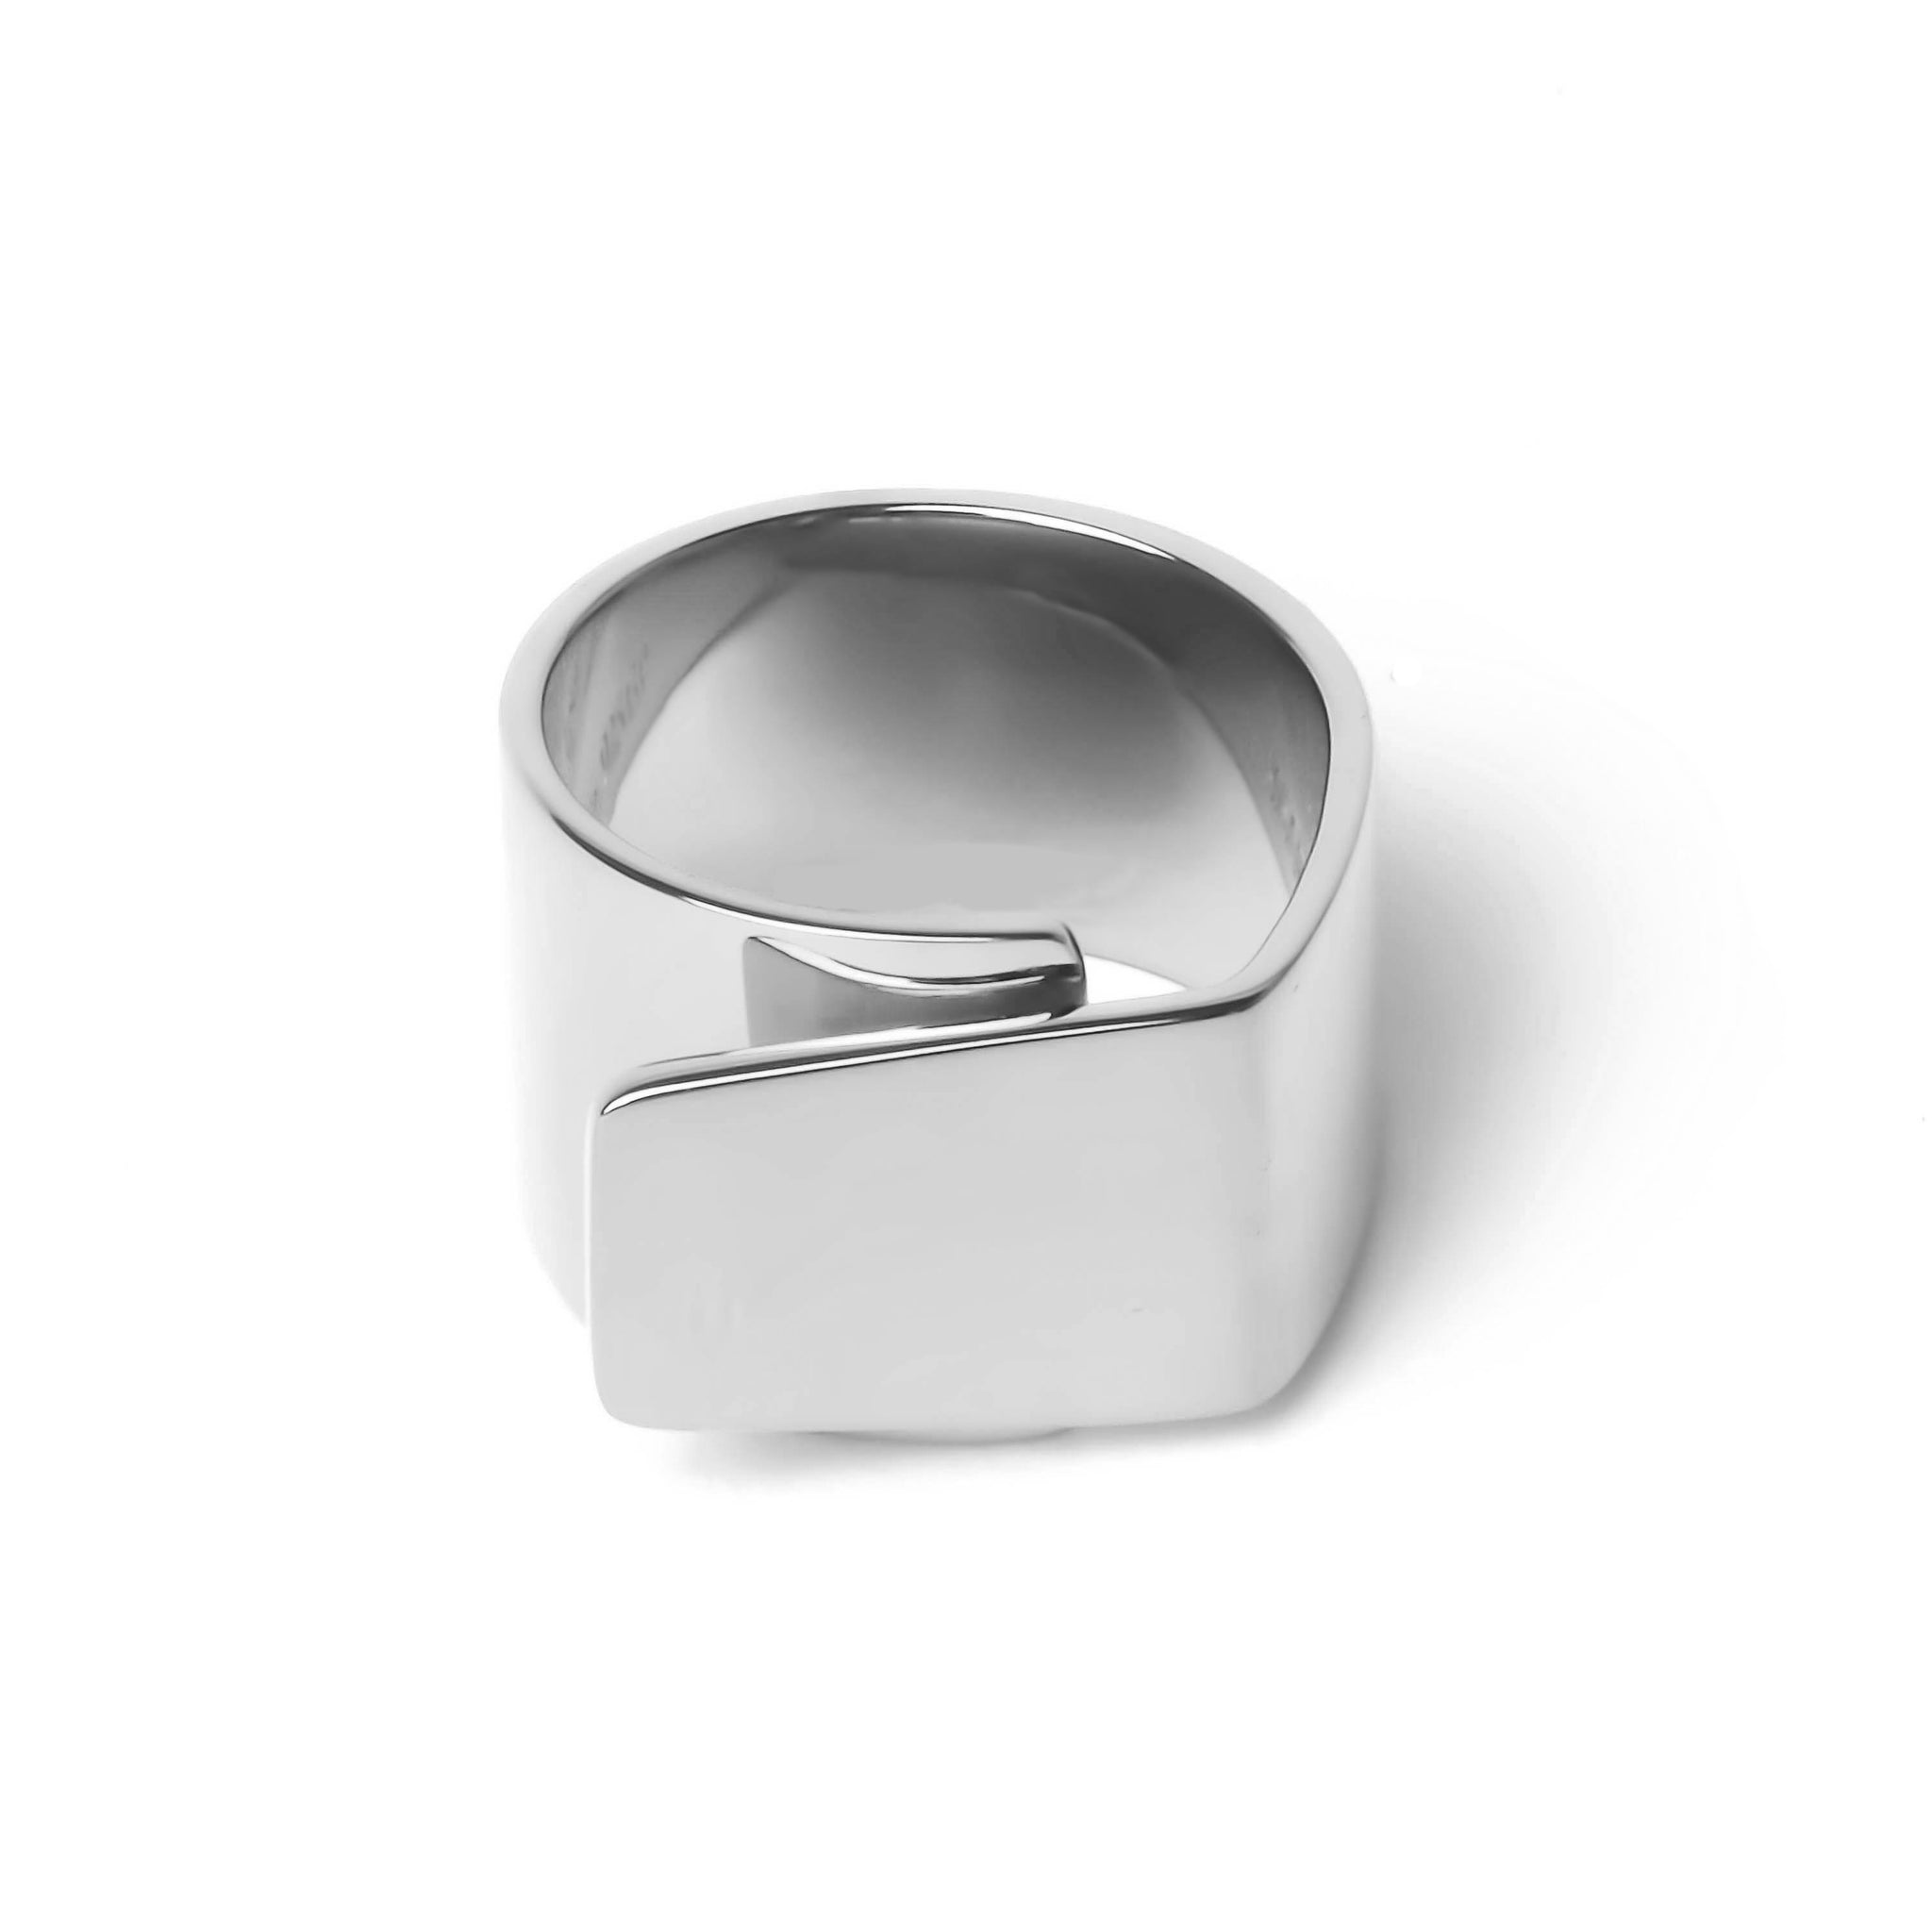 Wide silver ring with one side over lapping the other